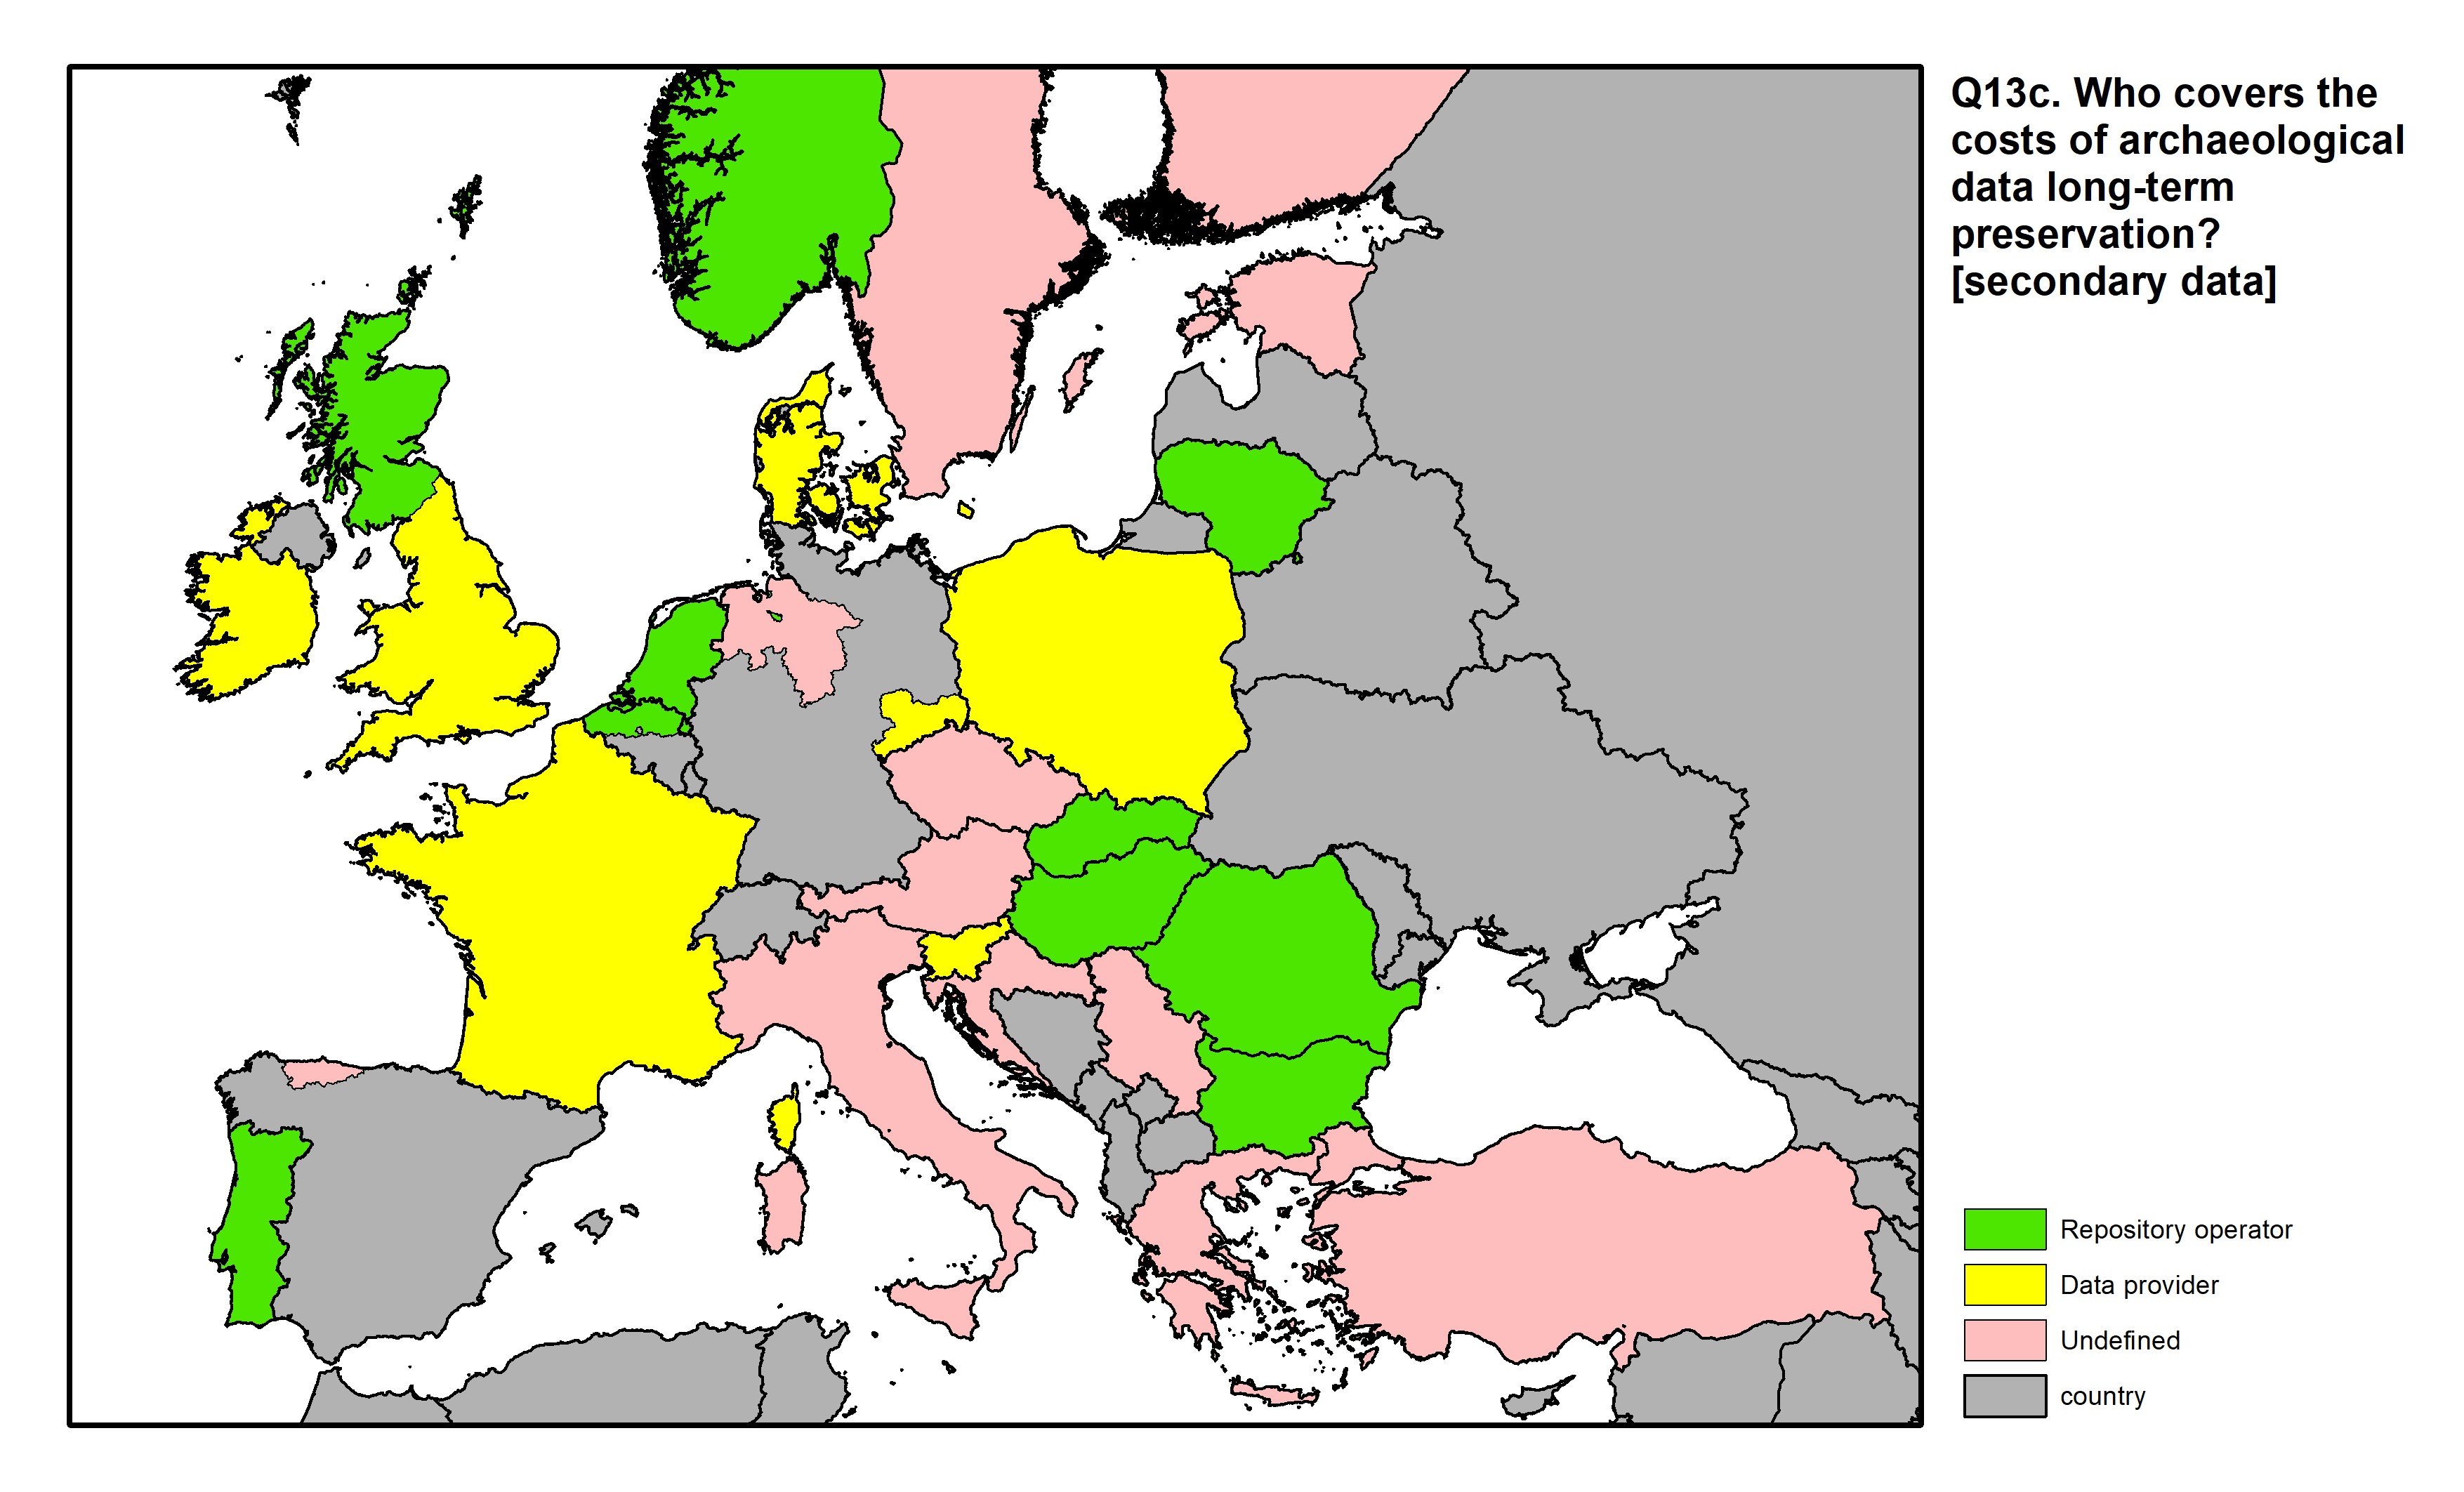 Figure 45: a map of Europe showing countries and regions in colour based on response rates to the survey question.